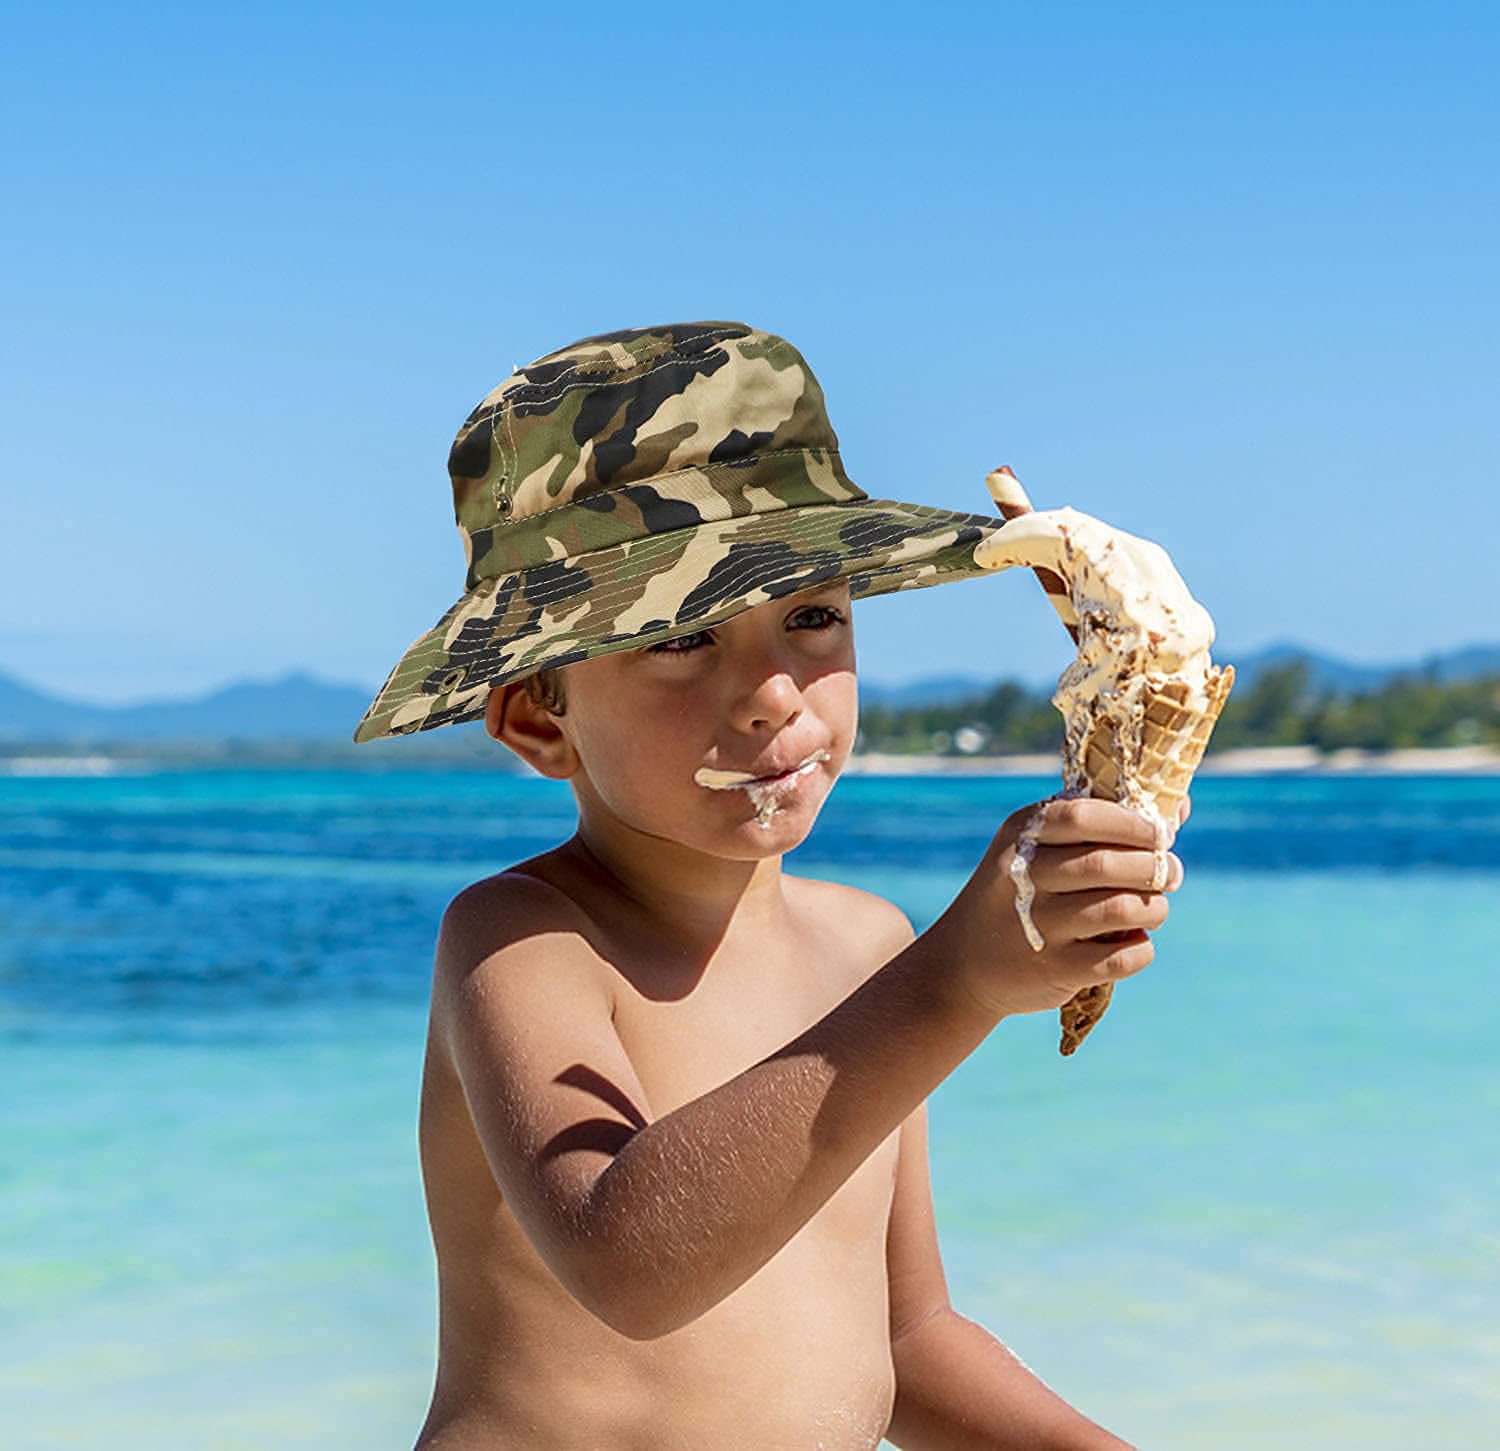 Buy Sun Hat Bucket-Boys-Camouflage Hats Fishman Cap Packable (Camo,56cm  Suggested for 7-14years Old Kids) at